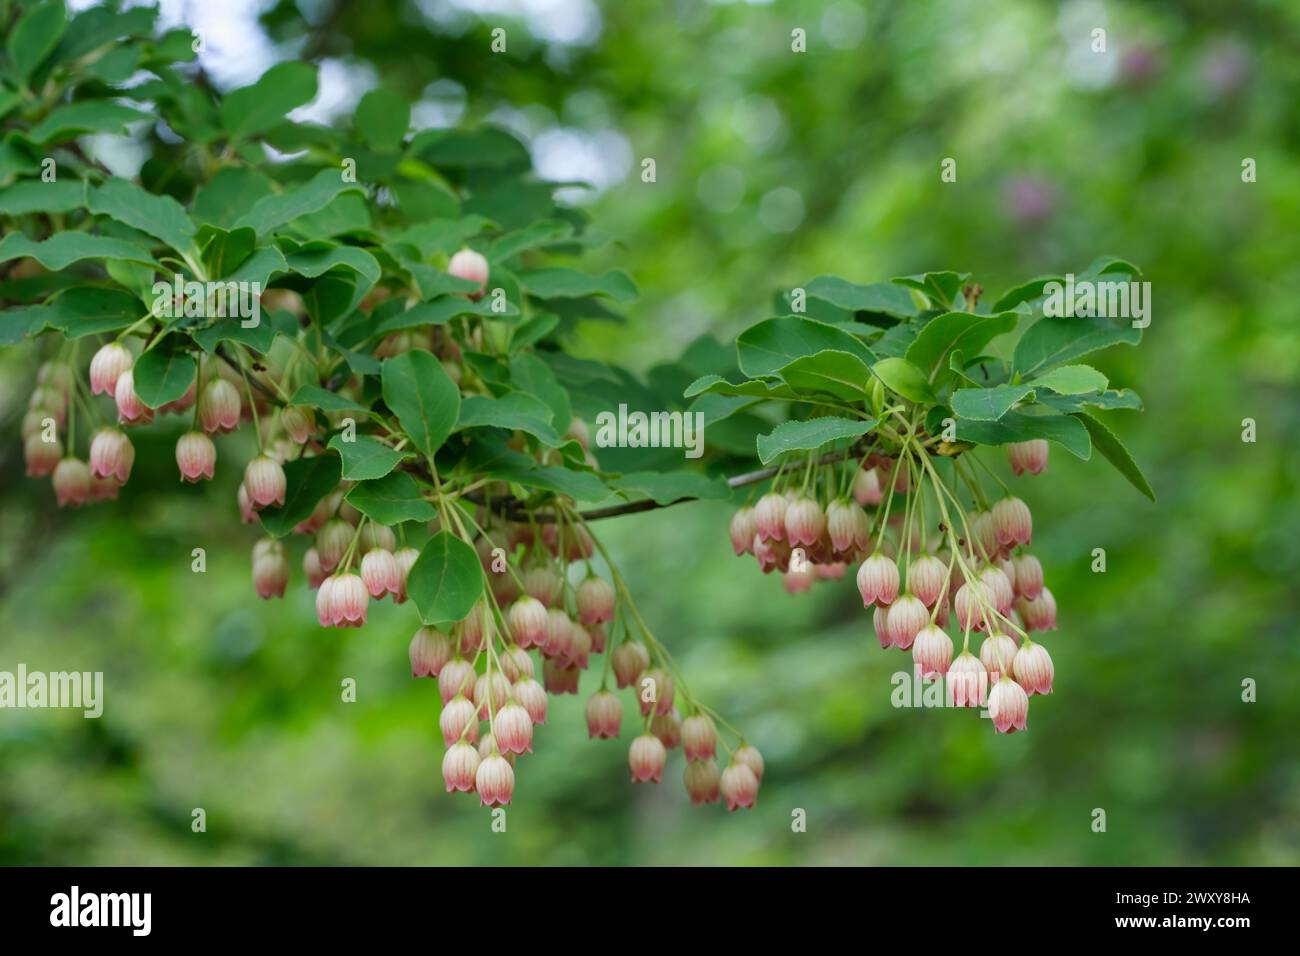 Chinese enkianthus, Enkianthus himalaicus var. chinensis, clusters of bell-shaped, cream flowers, pink veins Stock Photo